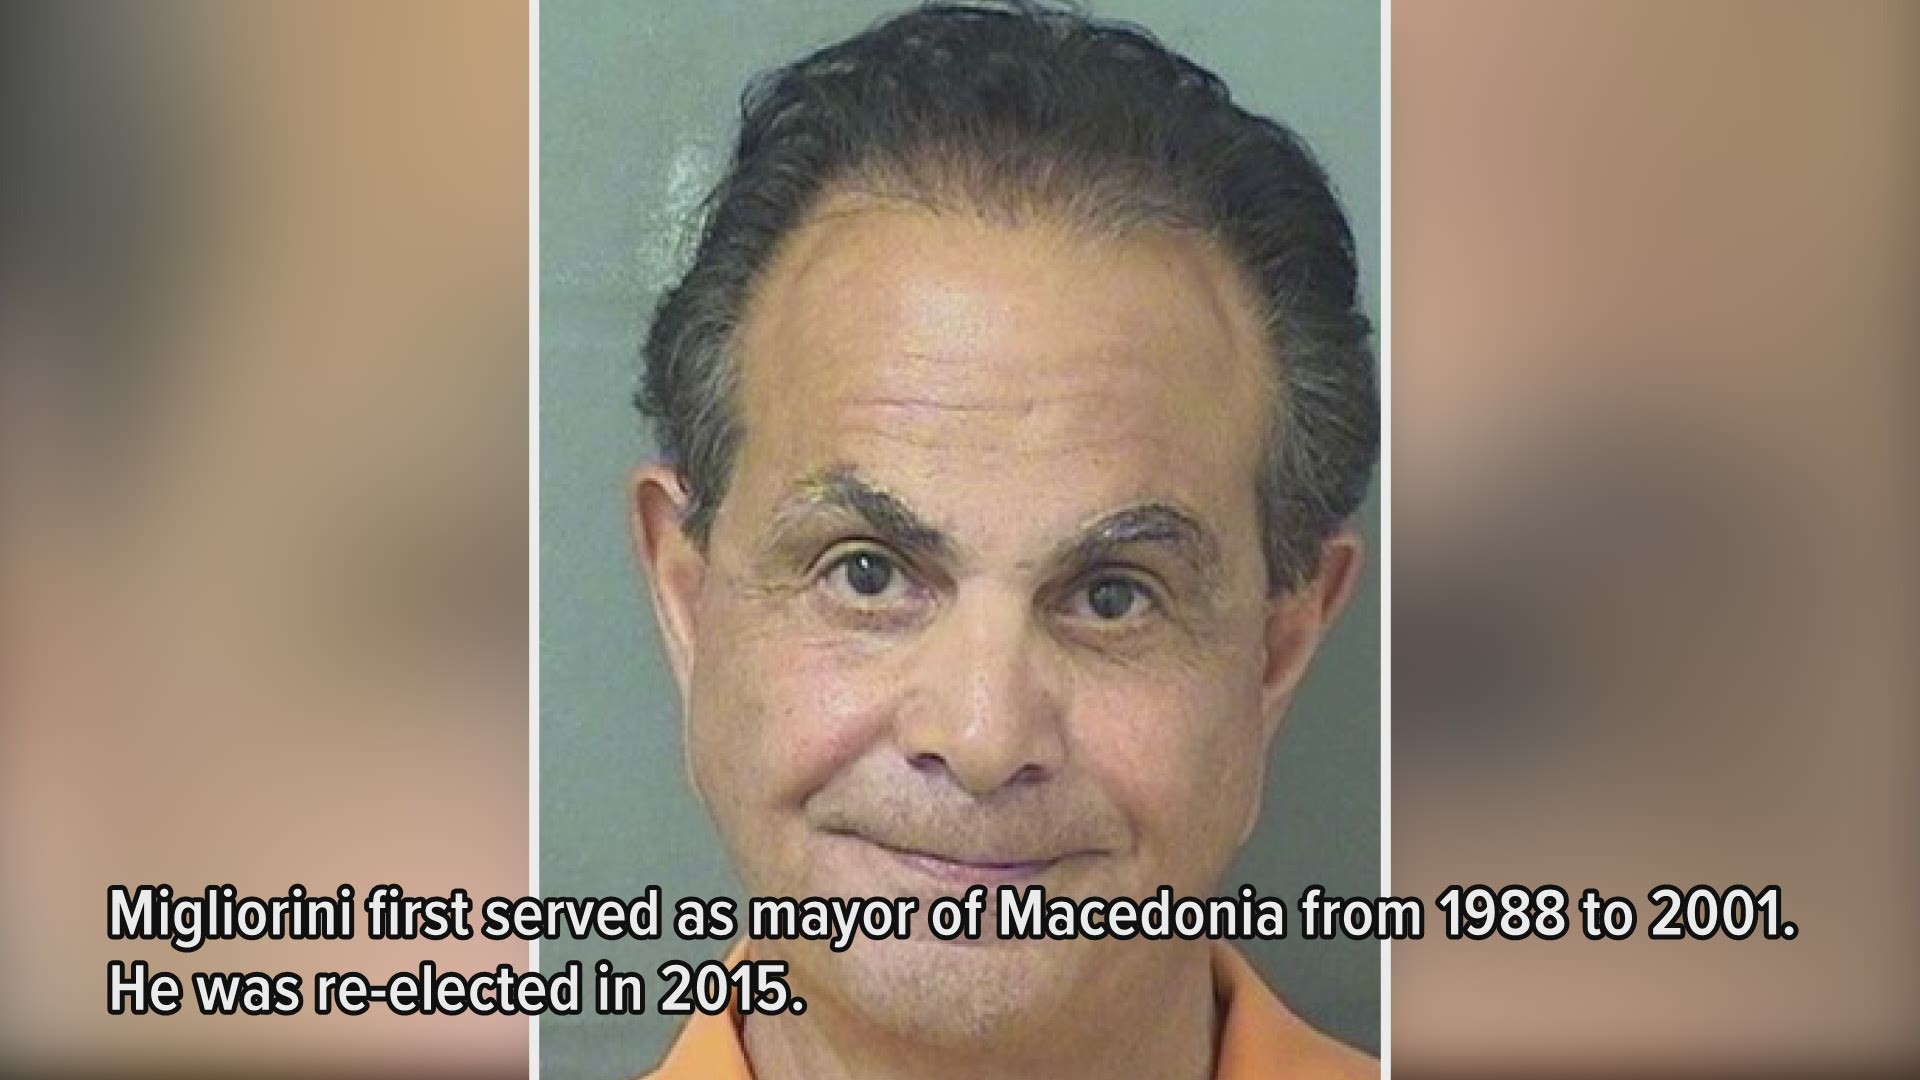 Joe Migliorini, a former Macedonia Mayor has turned himself in after a warrant for his arrest was issued